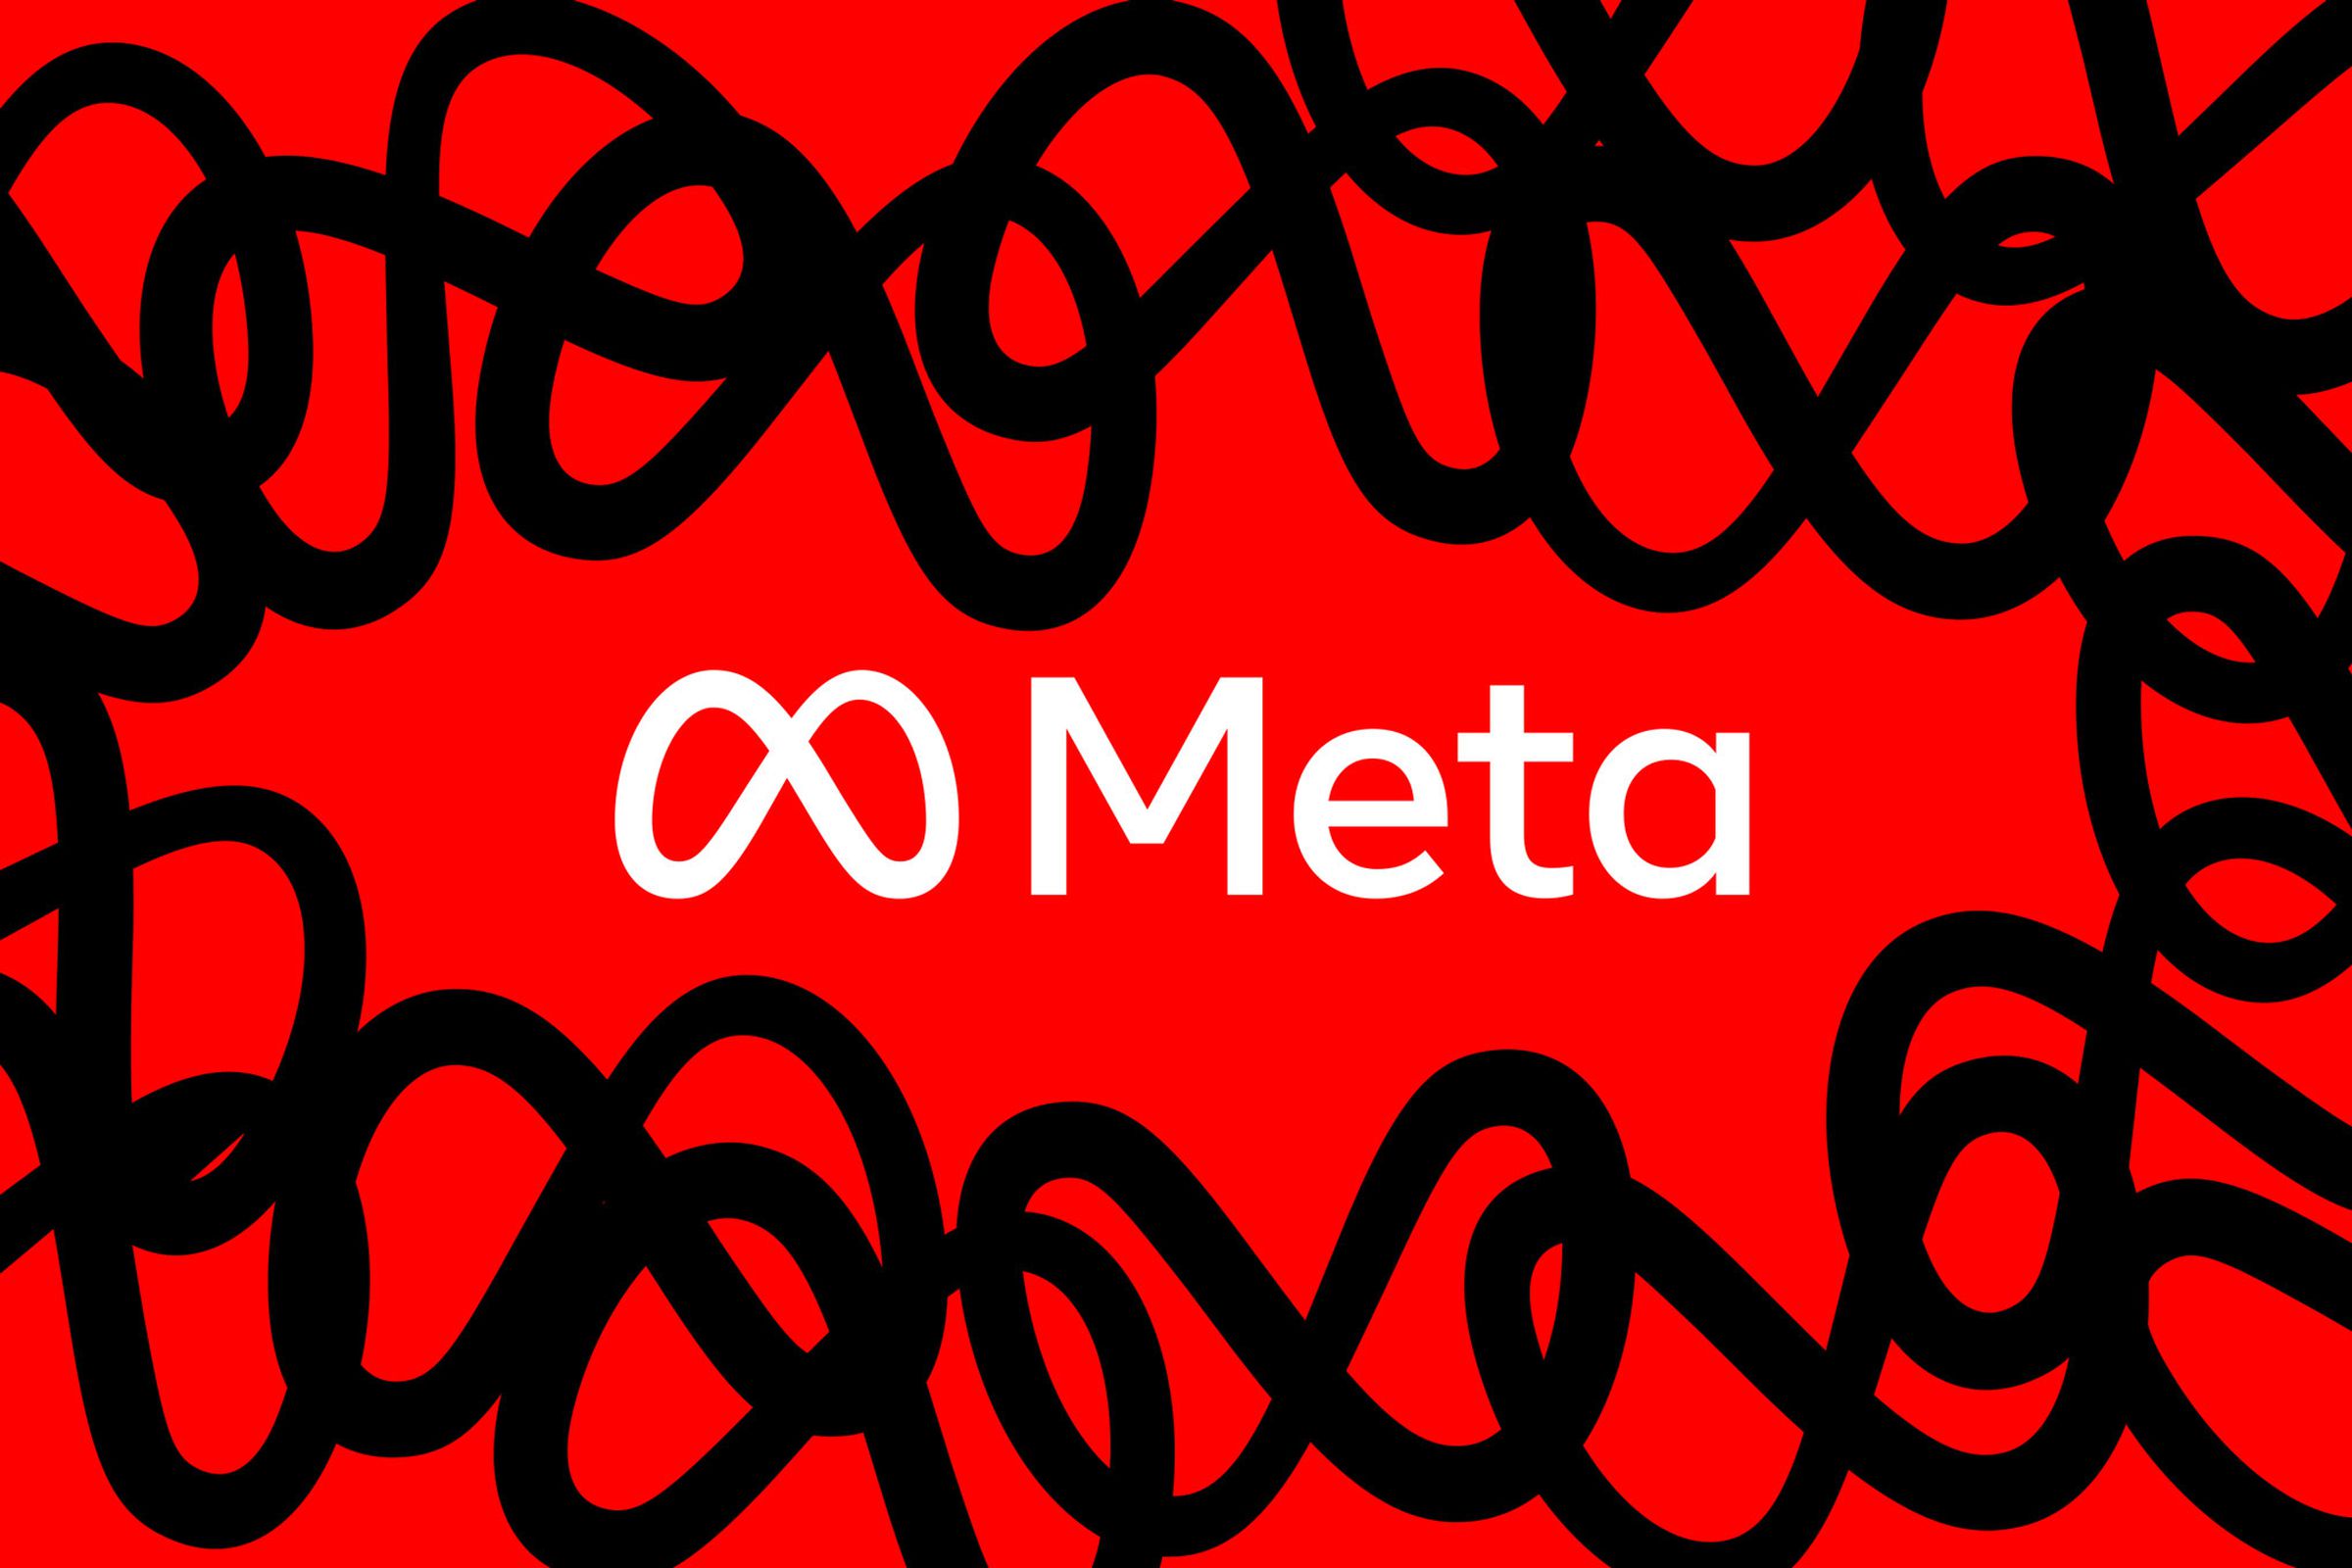 Meta logo on a red background with repeating black icons, giving a squiggly effect.